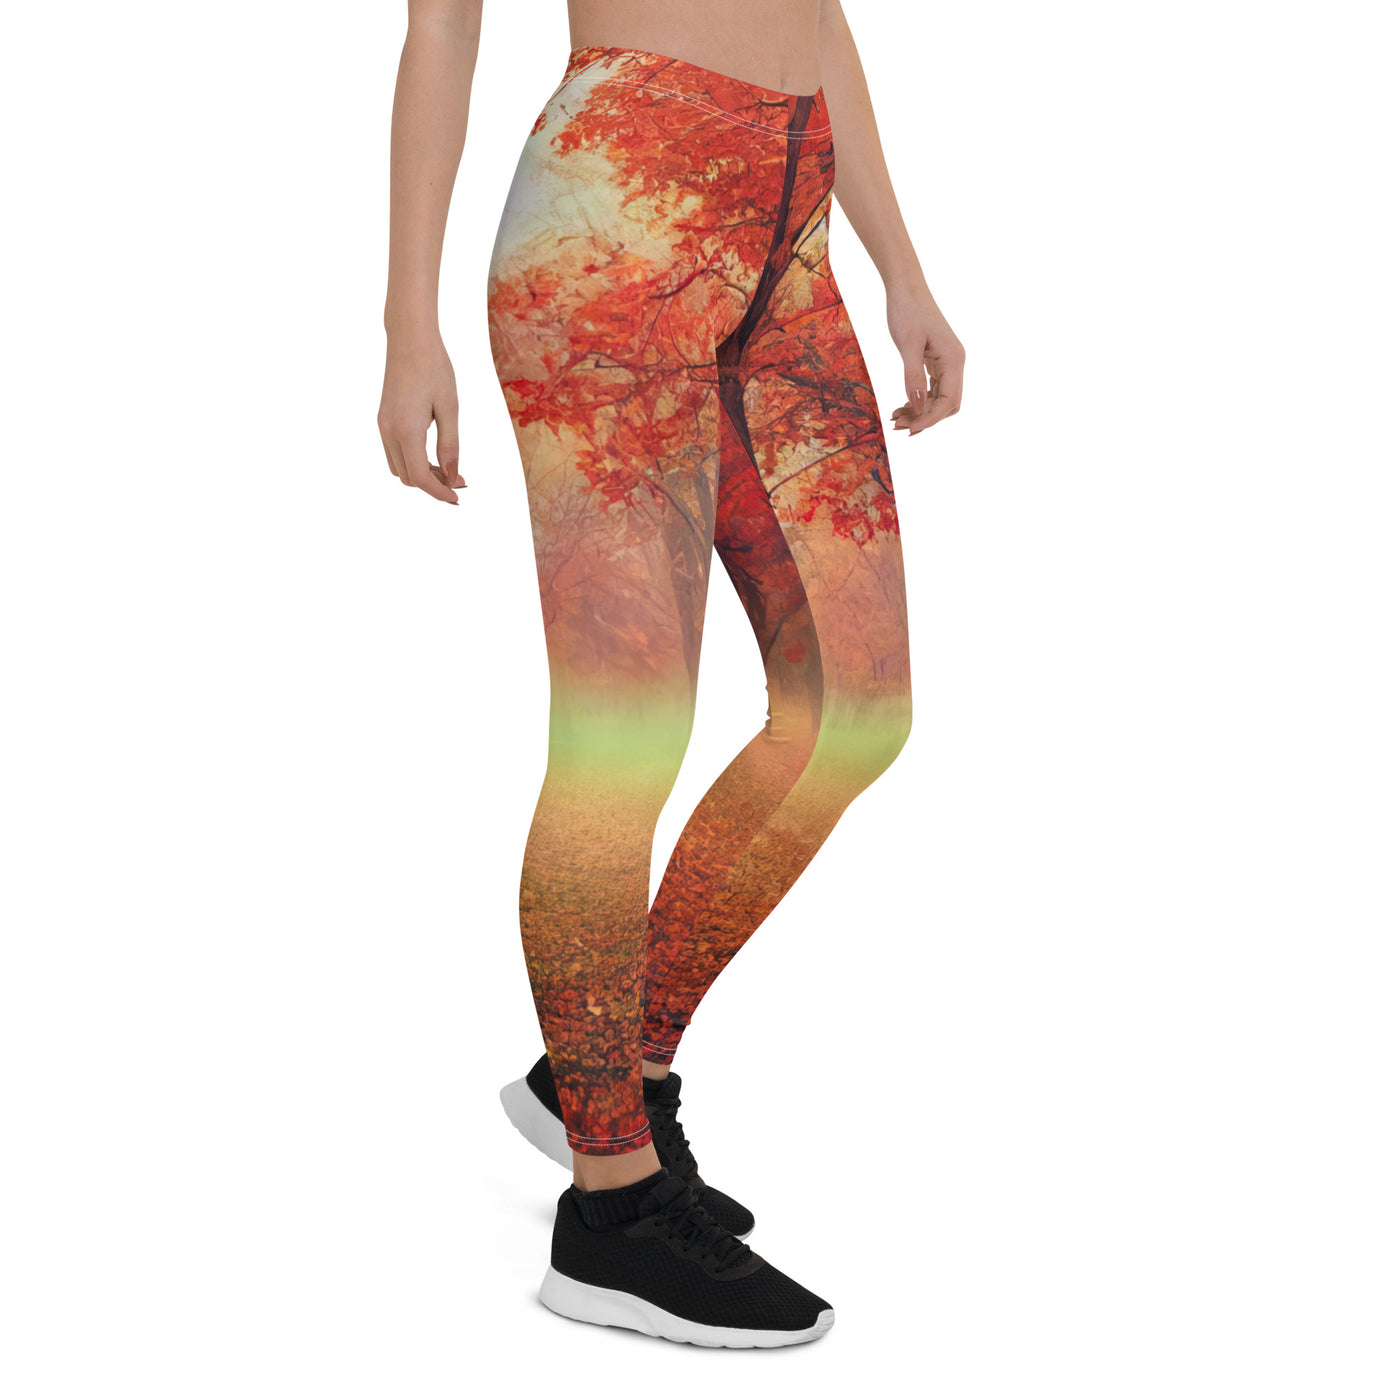 Wald im Herbst - Rote Herbstblätter - Leggings (All-Over Print) camping xxx